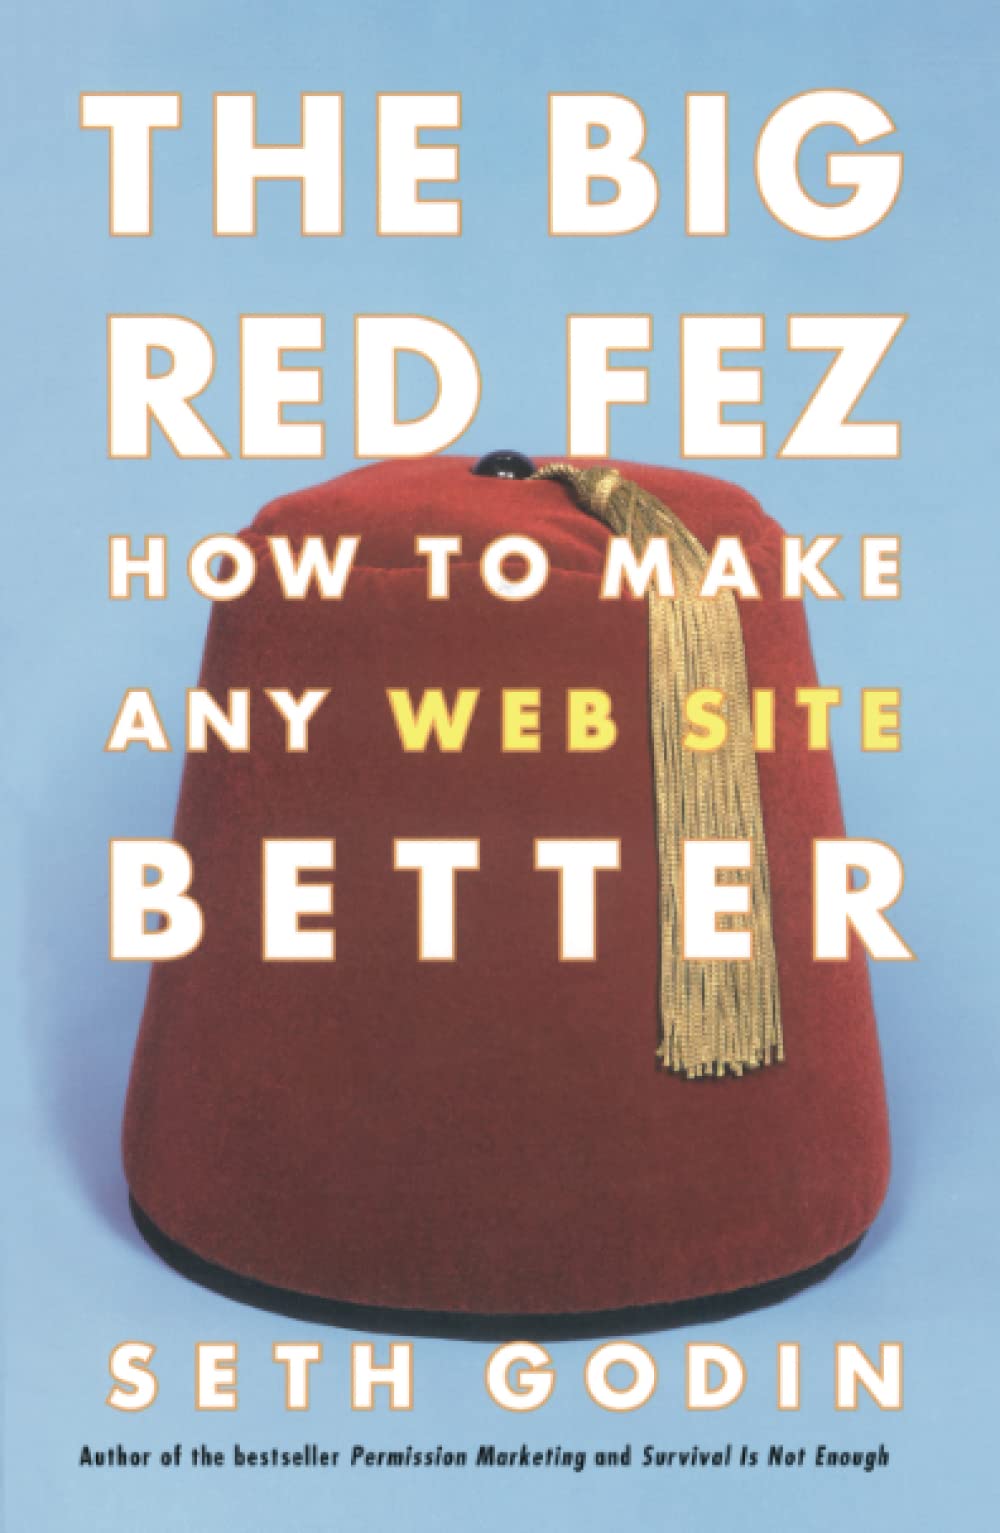 How To Make Any Website Better